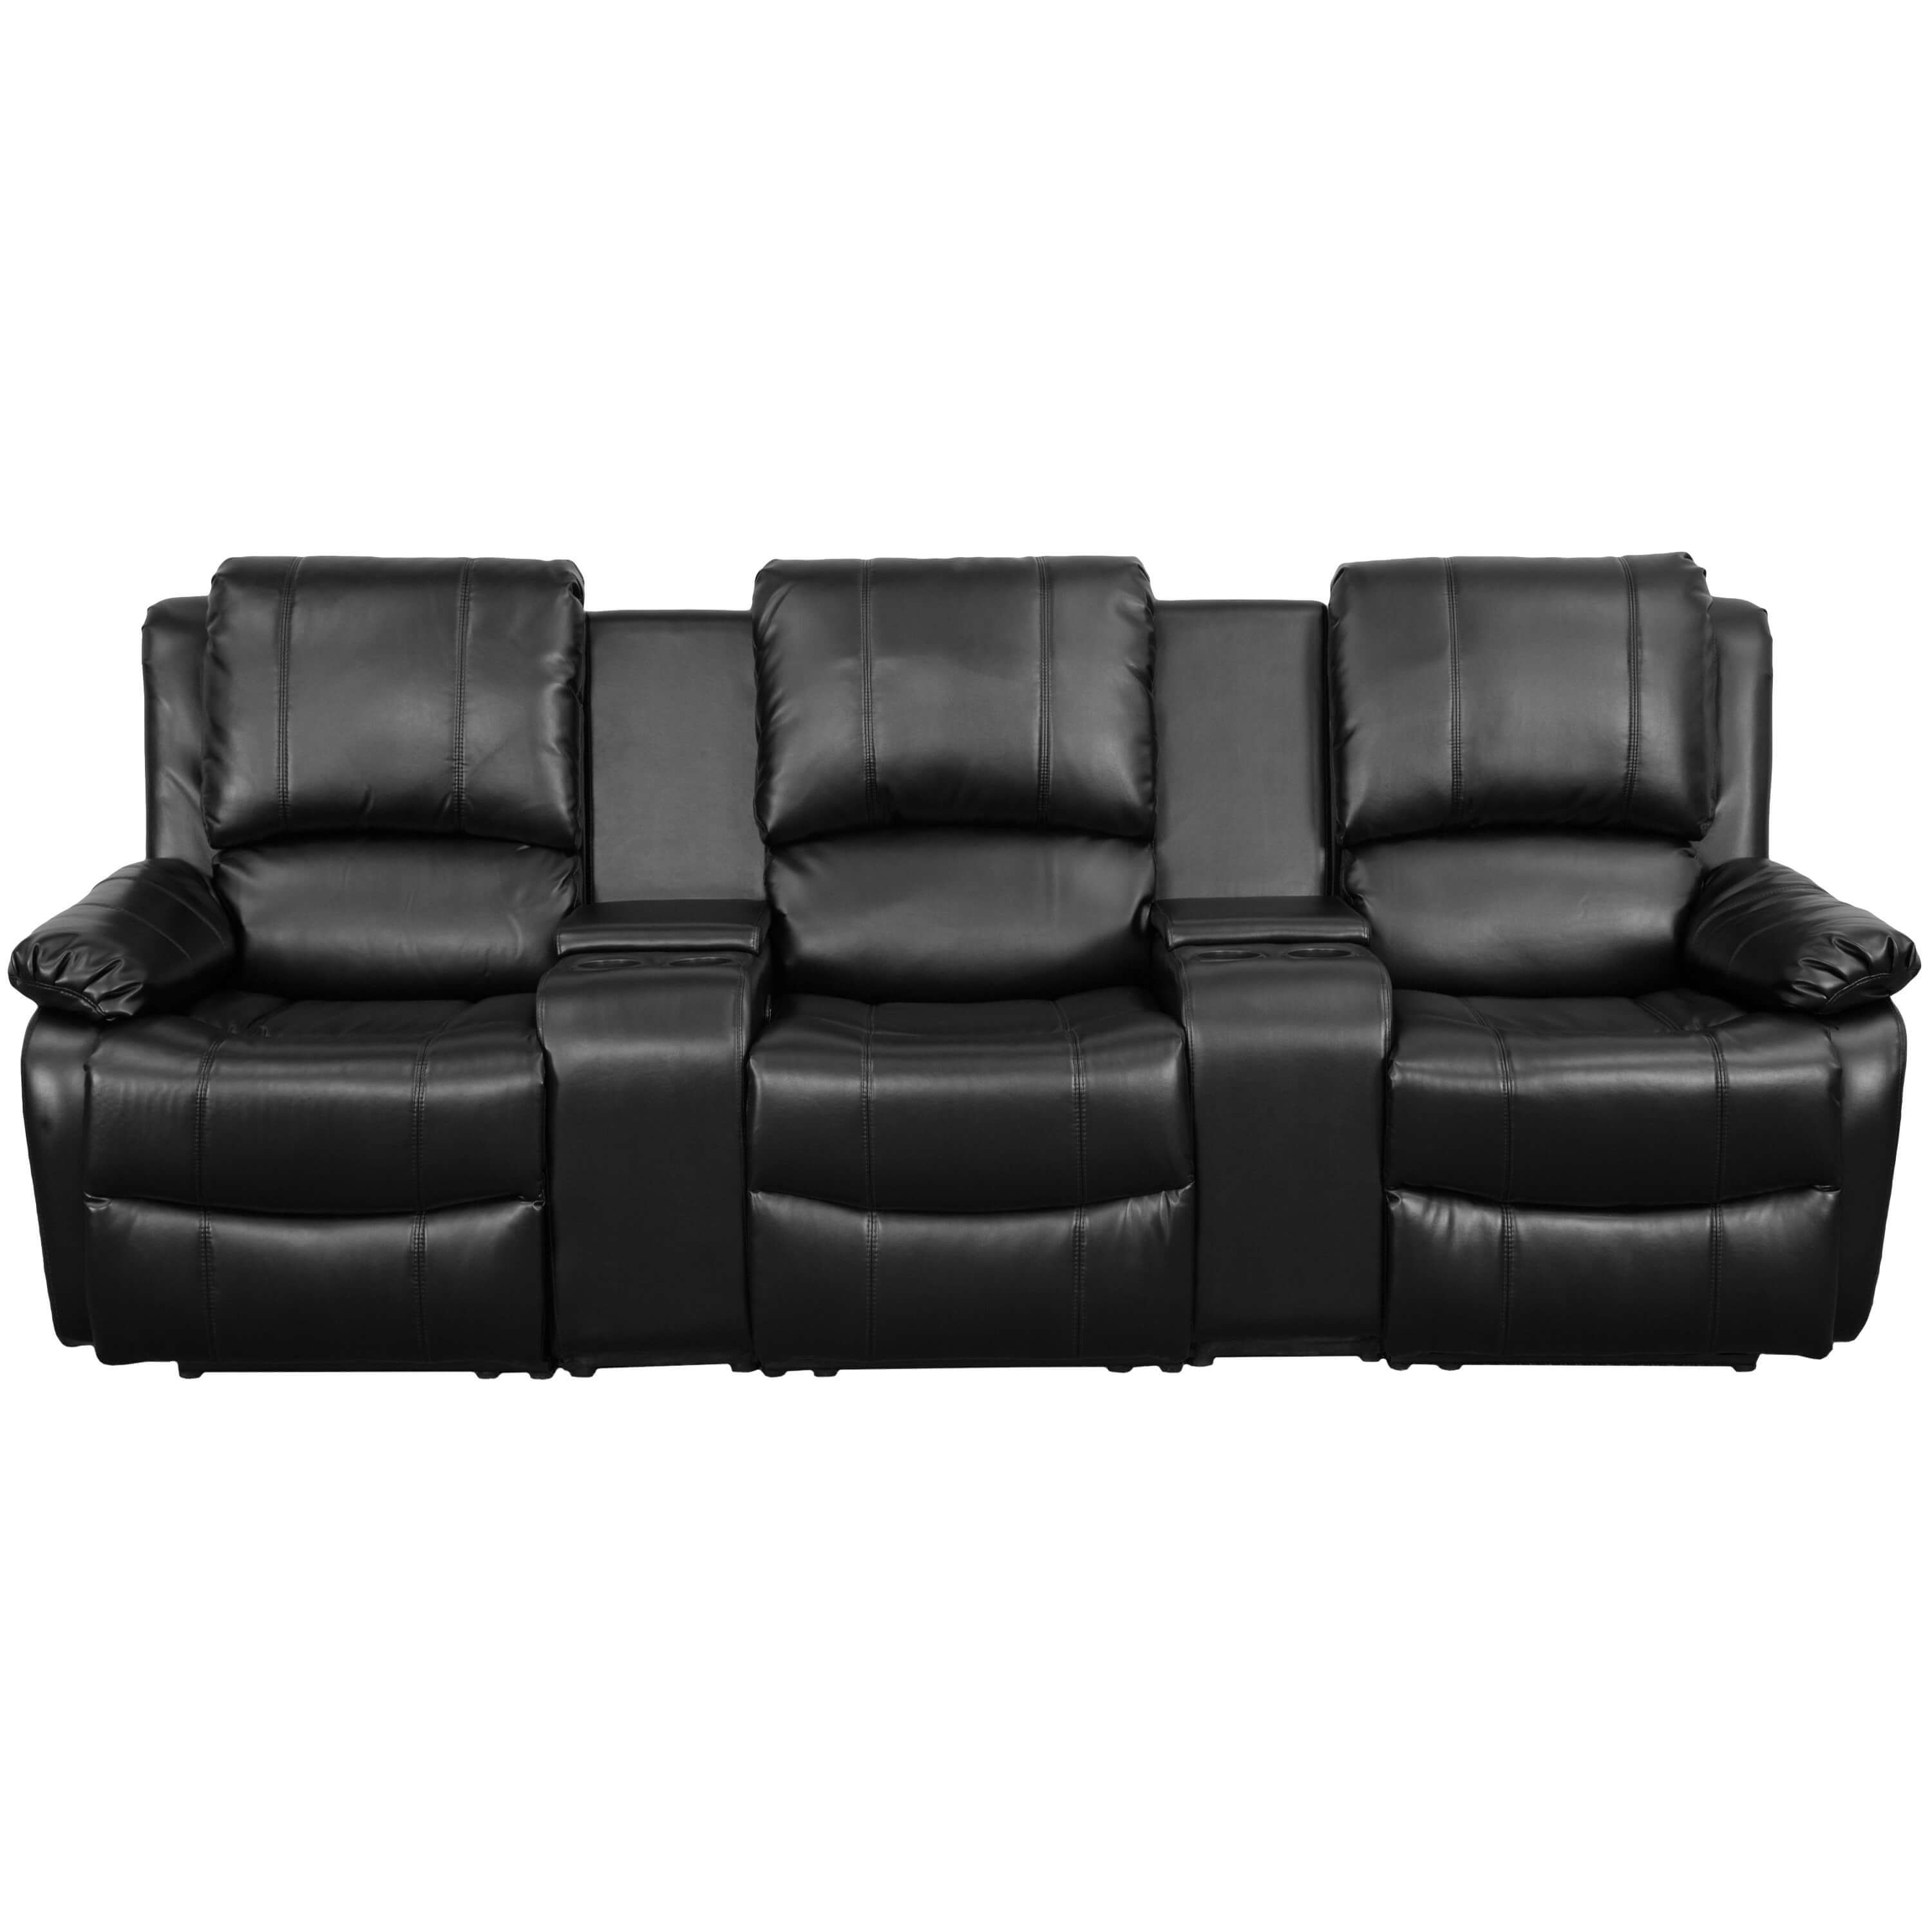 home-theatre-seating-leather-theater-chairs.jpg